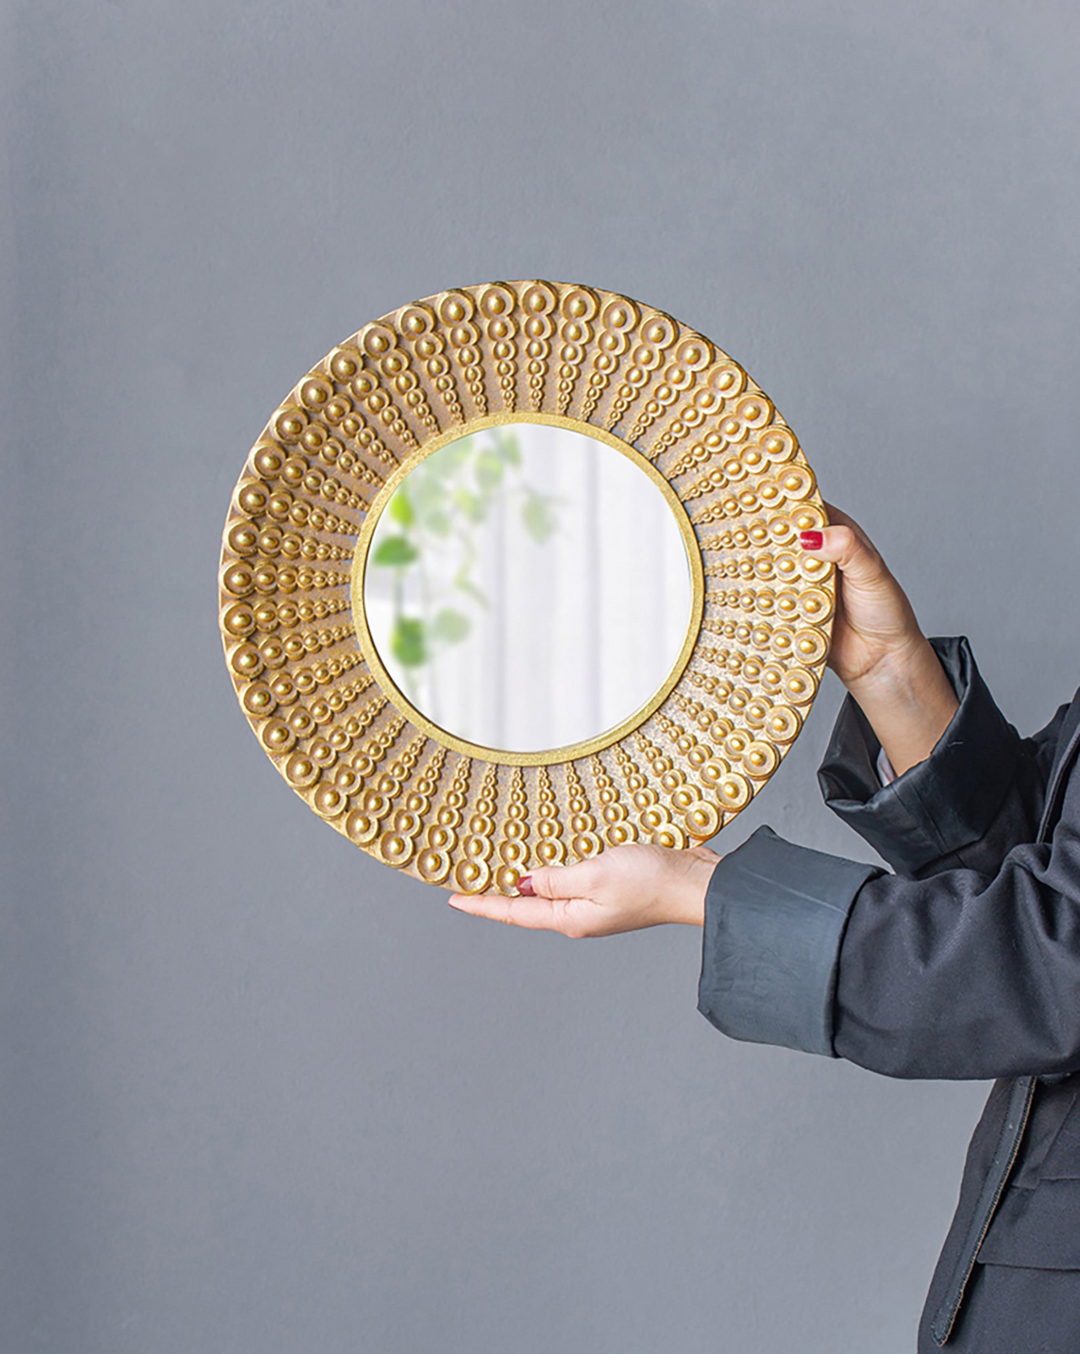 14" Gold Beaded Sunburst Mirror - A Radiant Accent for Every Room